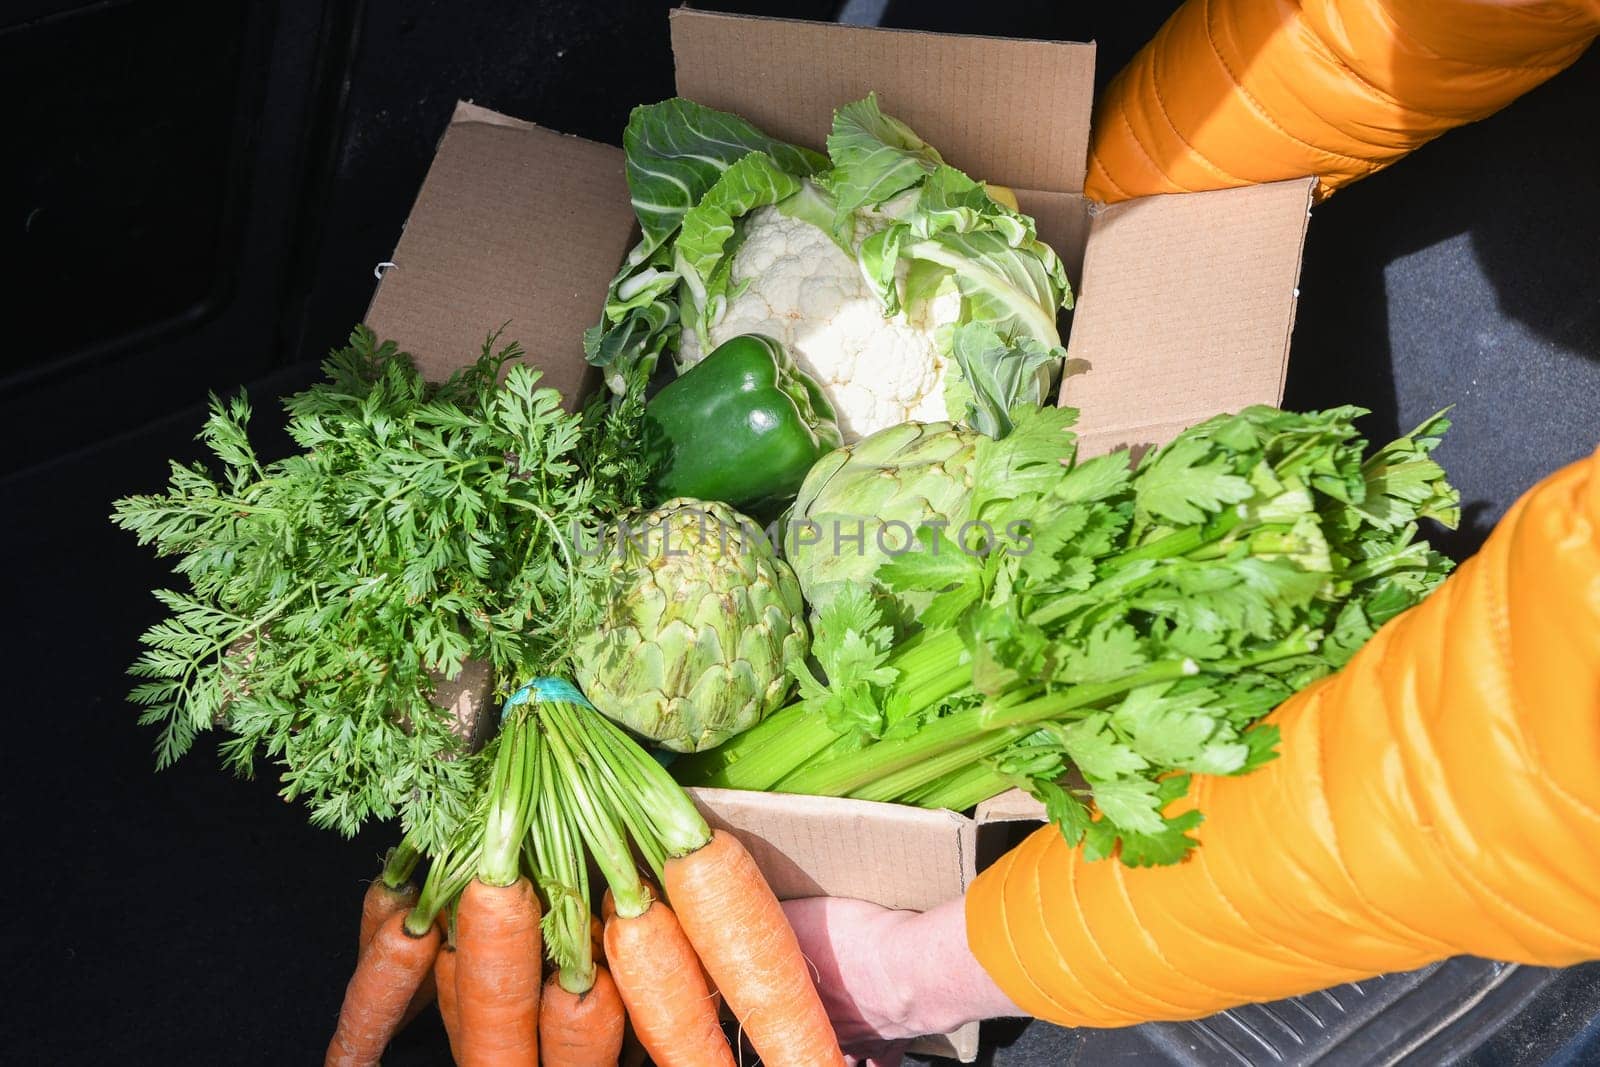 woman takes out a cardboard box with an assortment of fresh vegetables from the trunk of a car, organic food is the key to healthy eating, concept of cooking at home, high quality photo